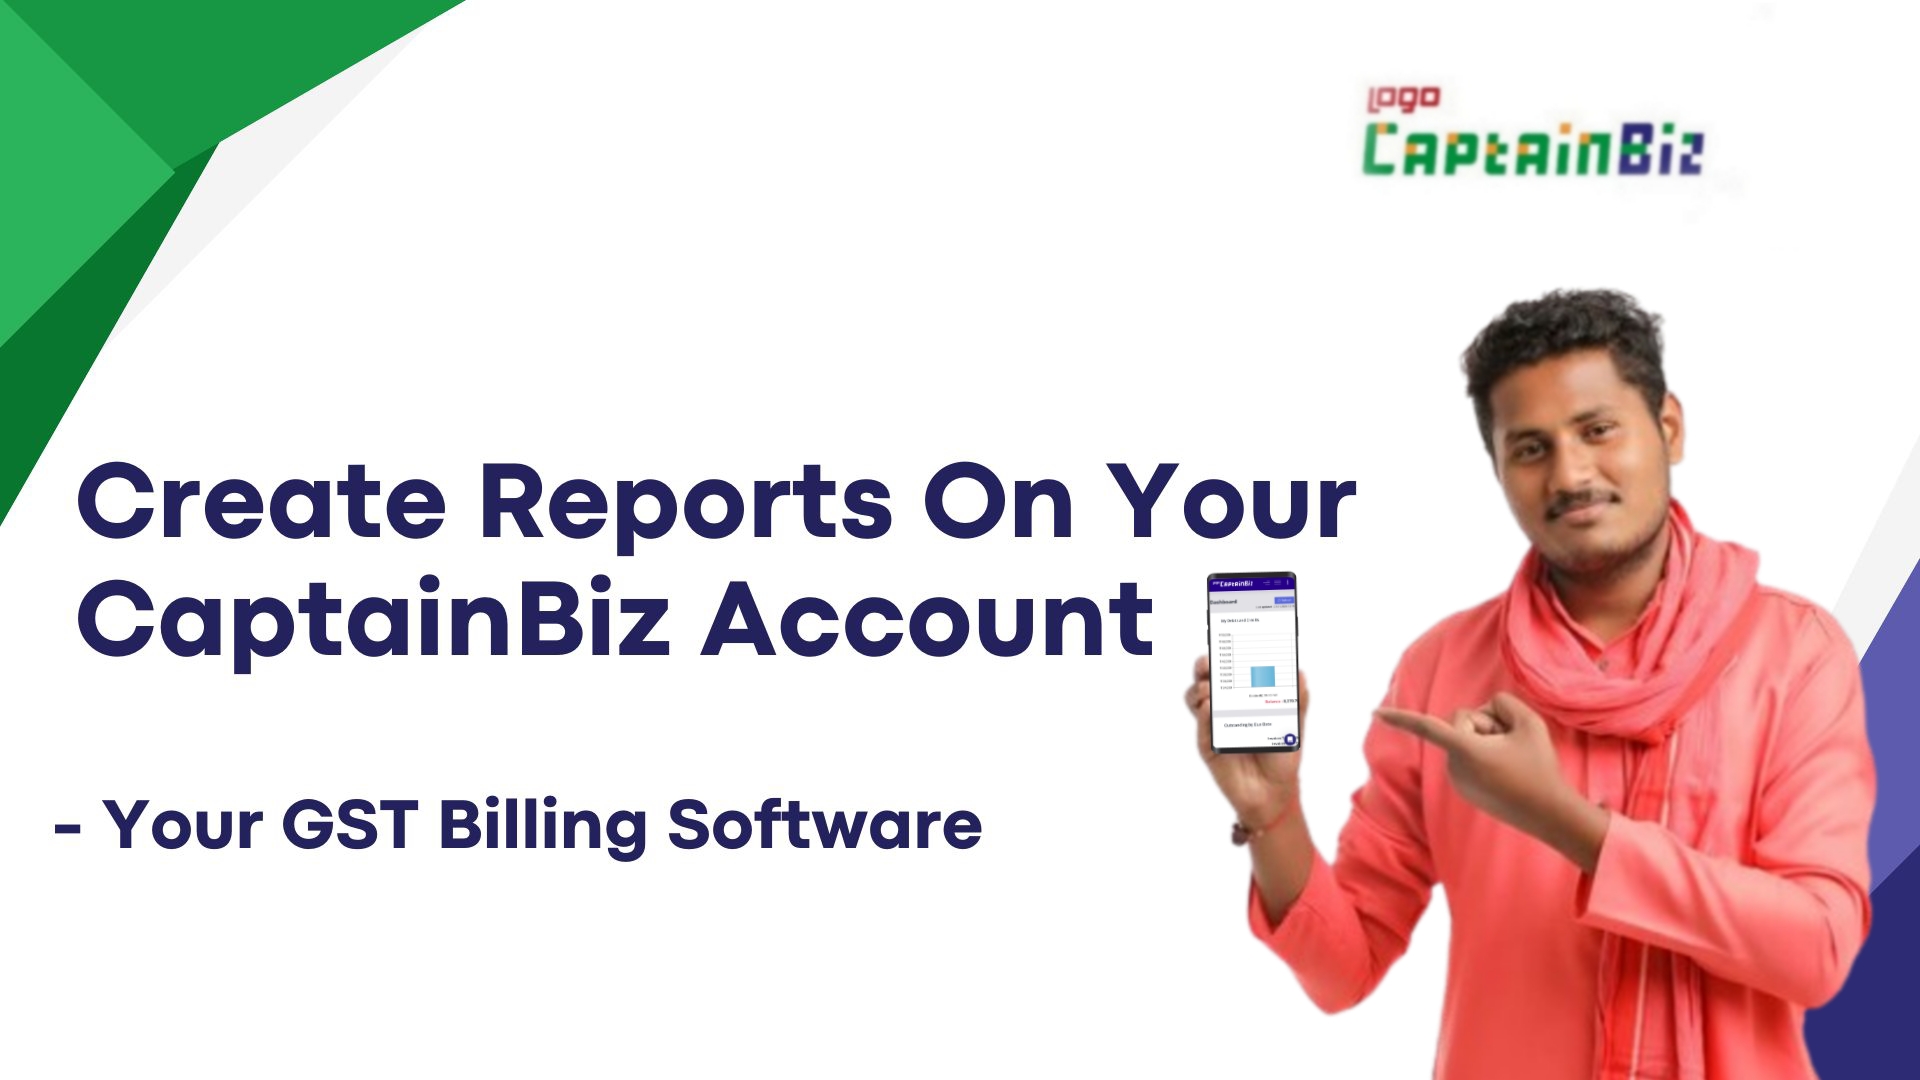 Generating Reports With Your CaptainBiz Account